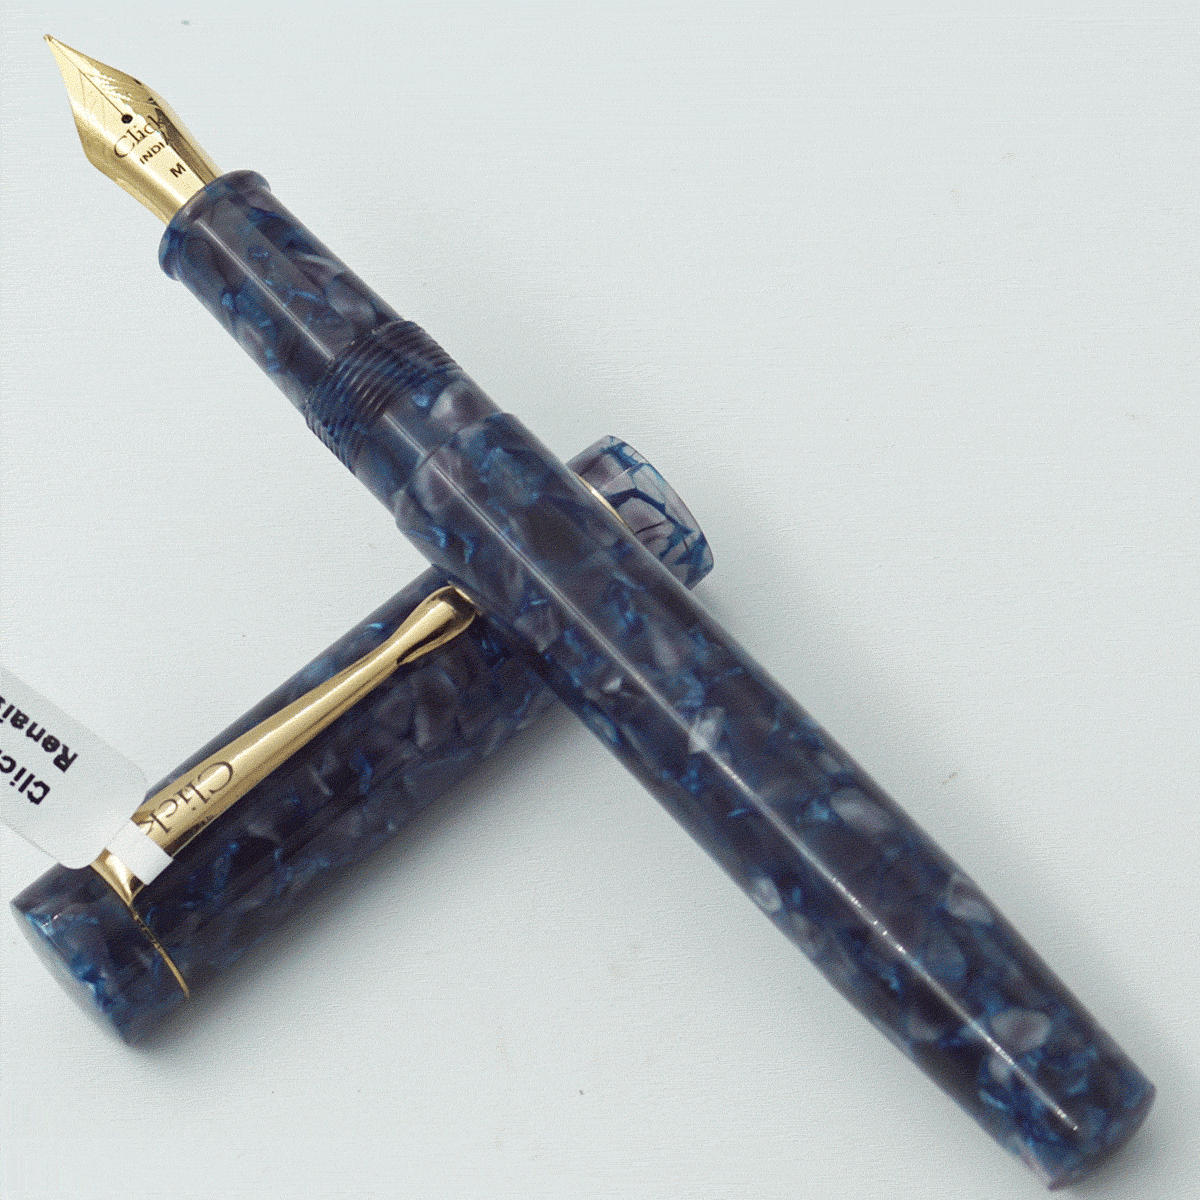 Click Renaissance Flashy Blue Color Marble Acrylic Body With Cap And Golden Clip No 35 SSF Medium Nib Eye Dropper Model Fountain Pen (3 in 1) (Nib Can be Customised) SKU 24047